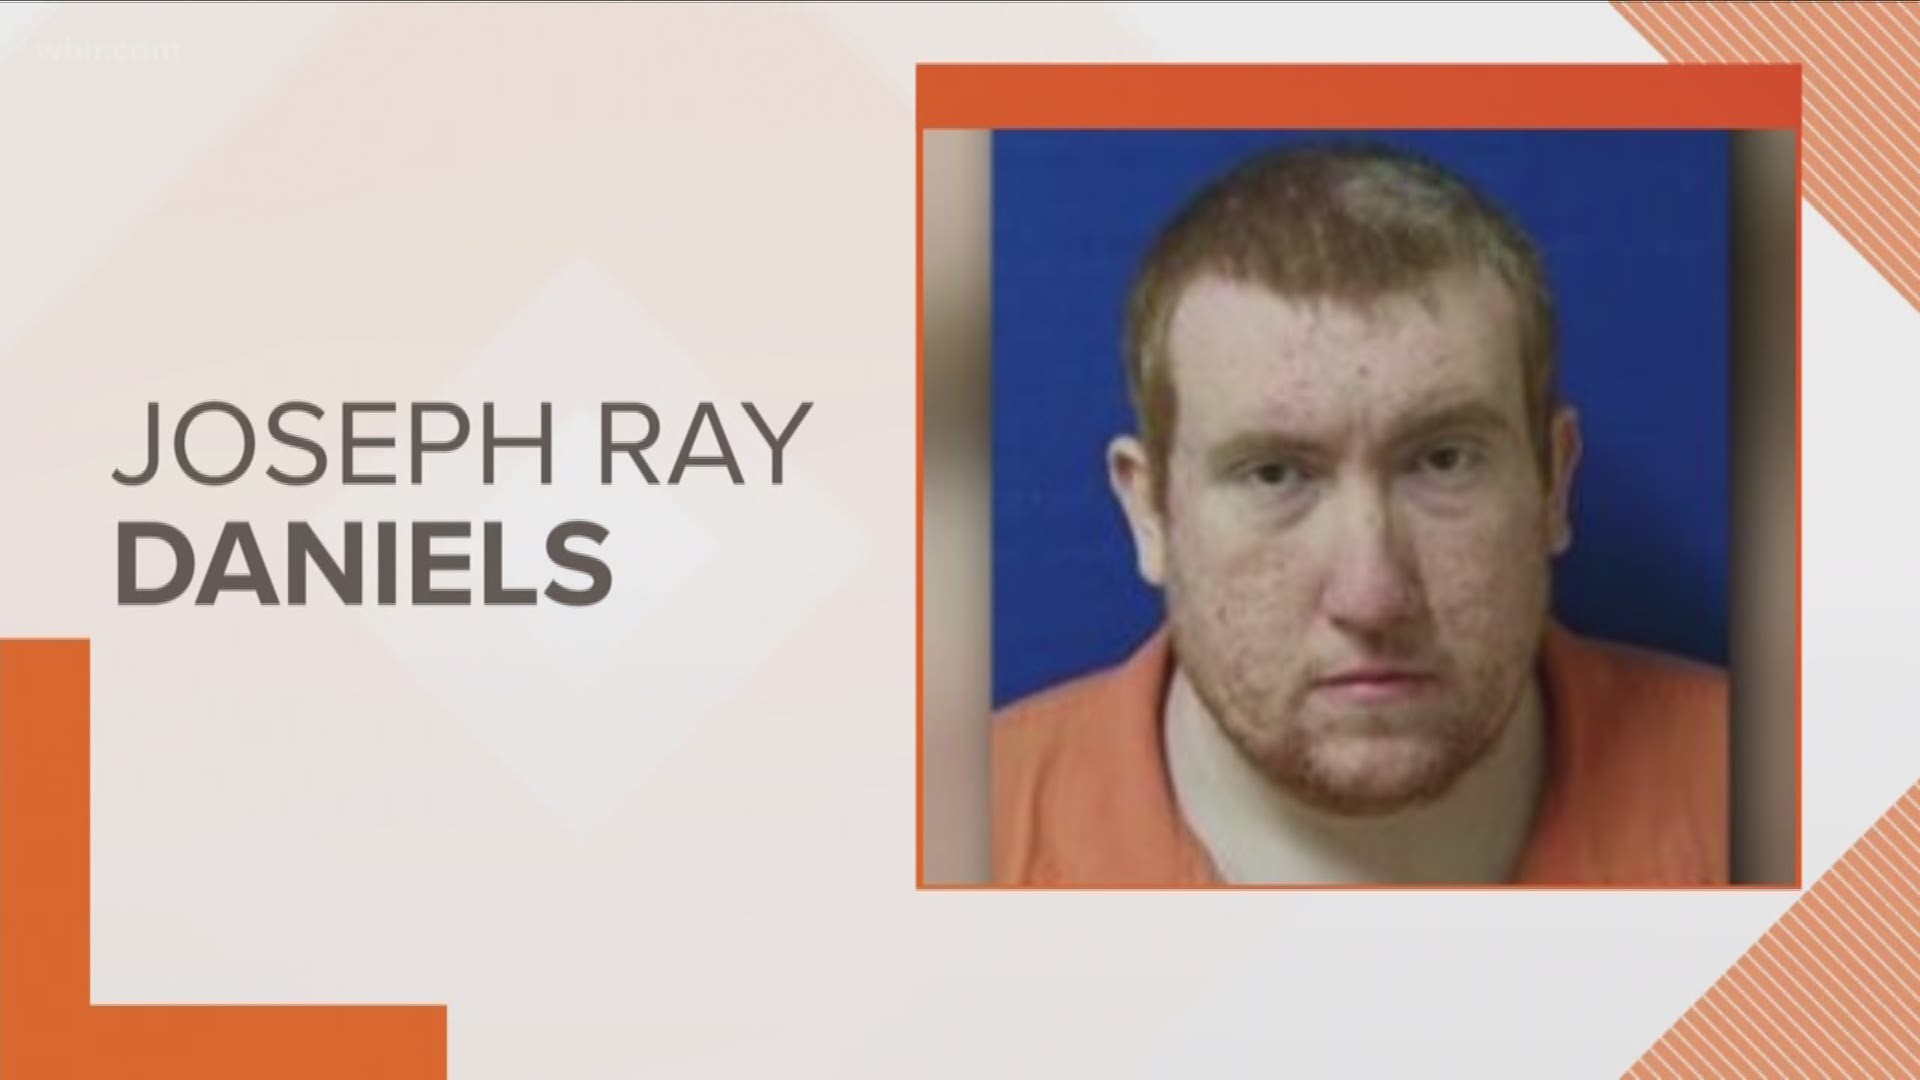 Court documents released Monday morning indicate that Joseph Ray Daniels told investigators he beat the boy to death, put Joe Clyde's body in the trunk of his car and disposed of the remains in a "remote area."